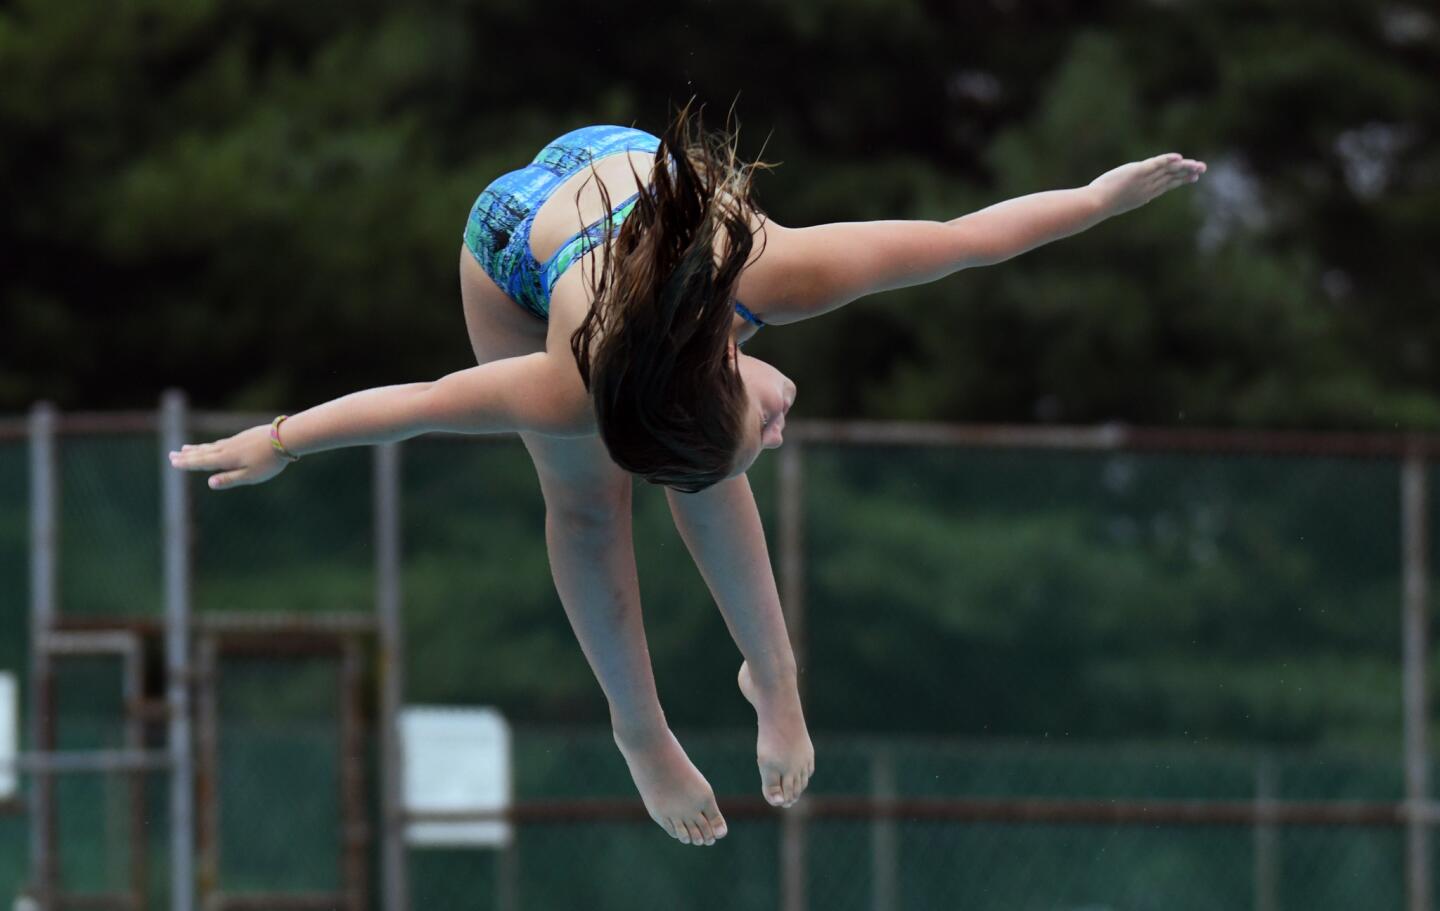 West Howard Swim Club diving team's Catherine Weish makes one of her dives during competition against North Saint Johns.